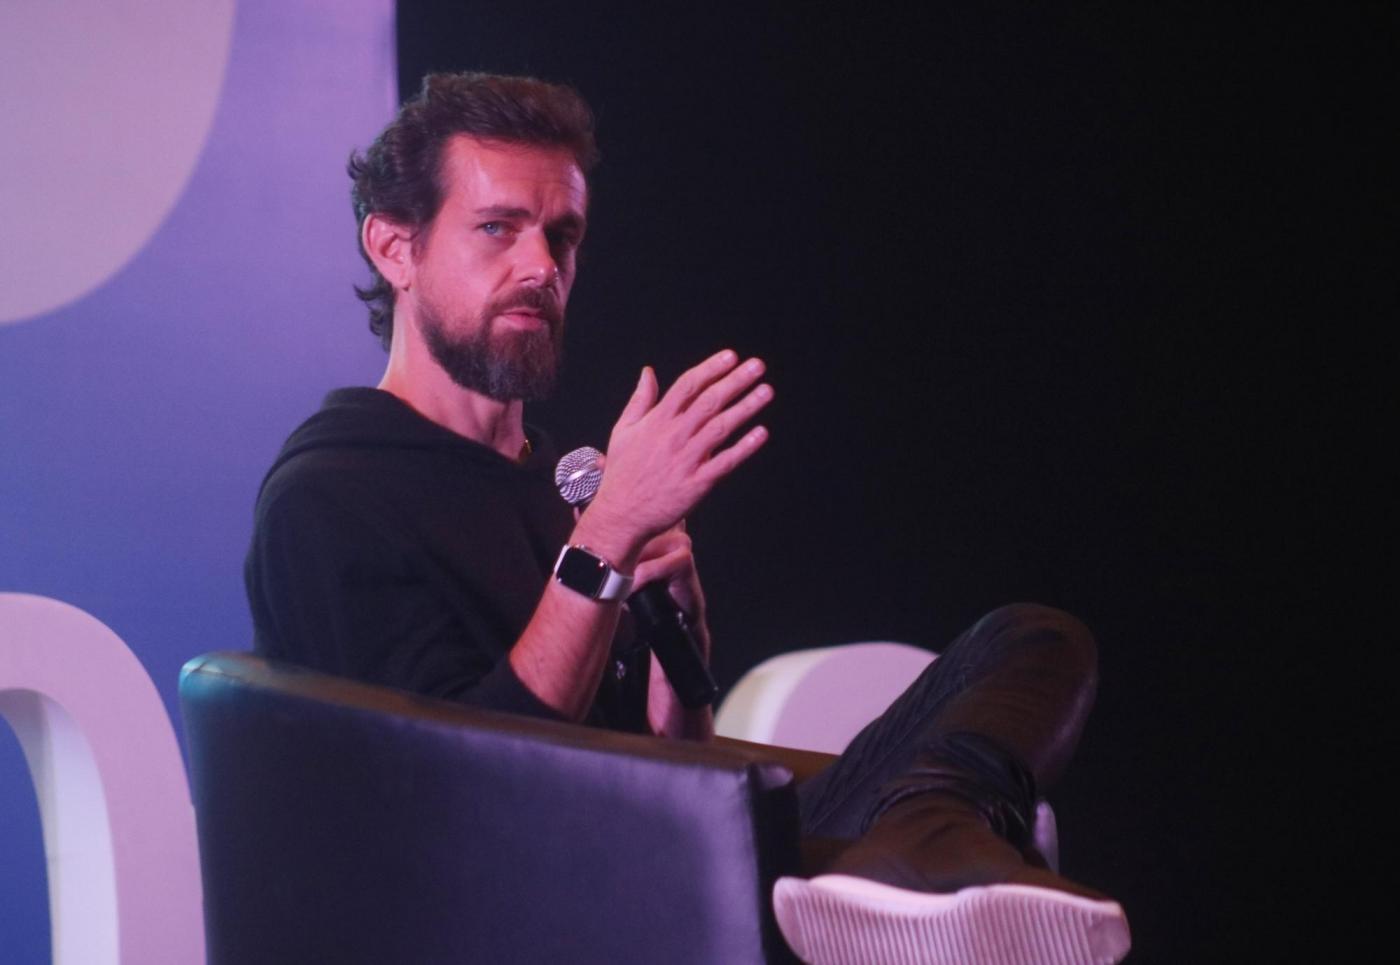 New Delhi: Twitter Co-founder and CEO Jack Dorsey addresses the students of IIT Delhi at the launch of a "youth initiative" on Nov 12, 2018. (Photo: IANS) by .